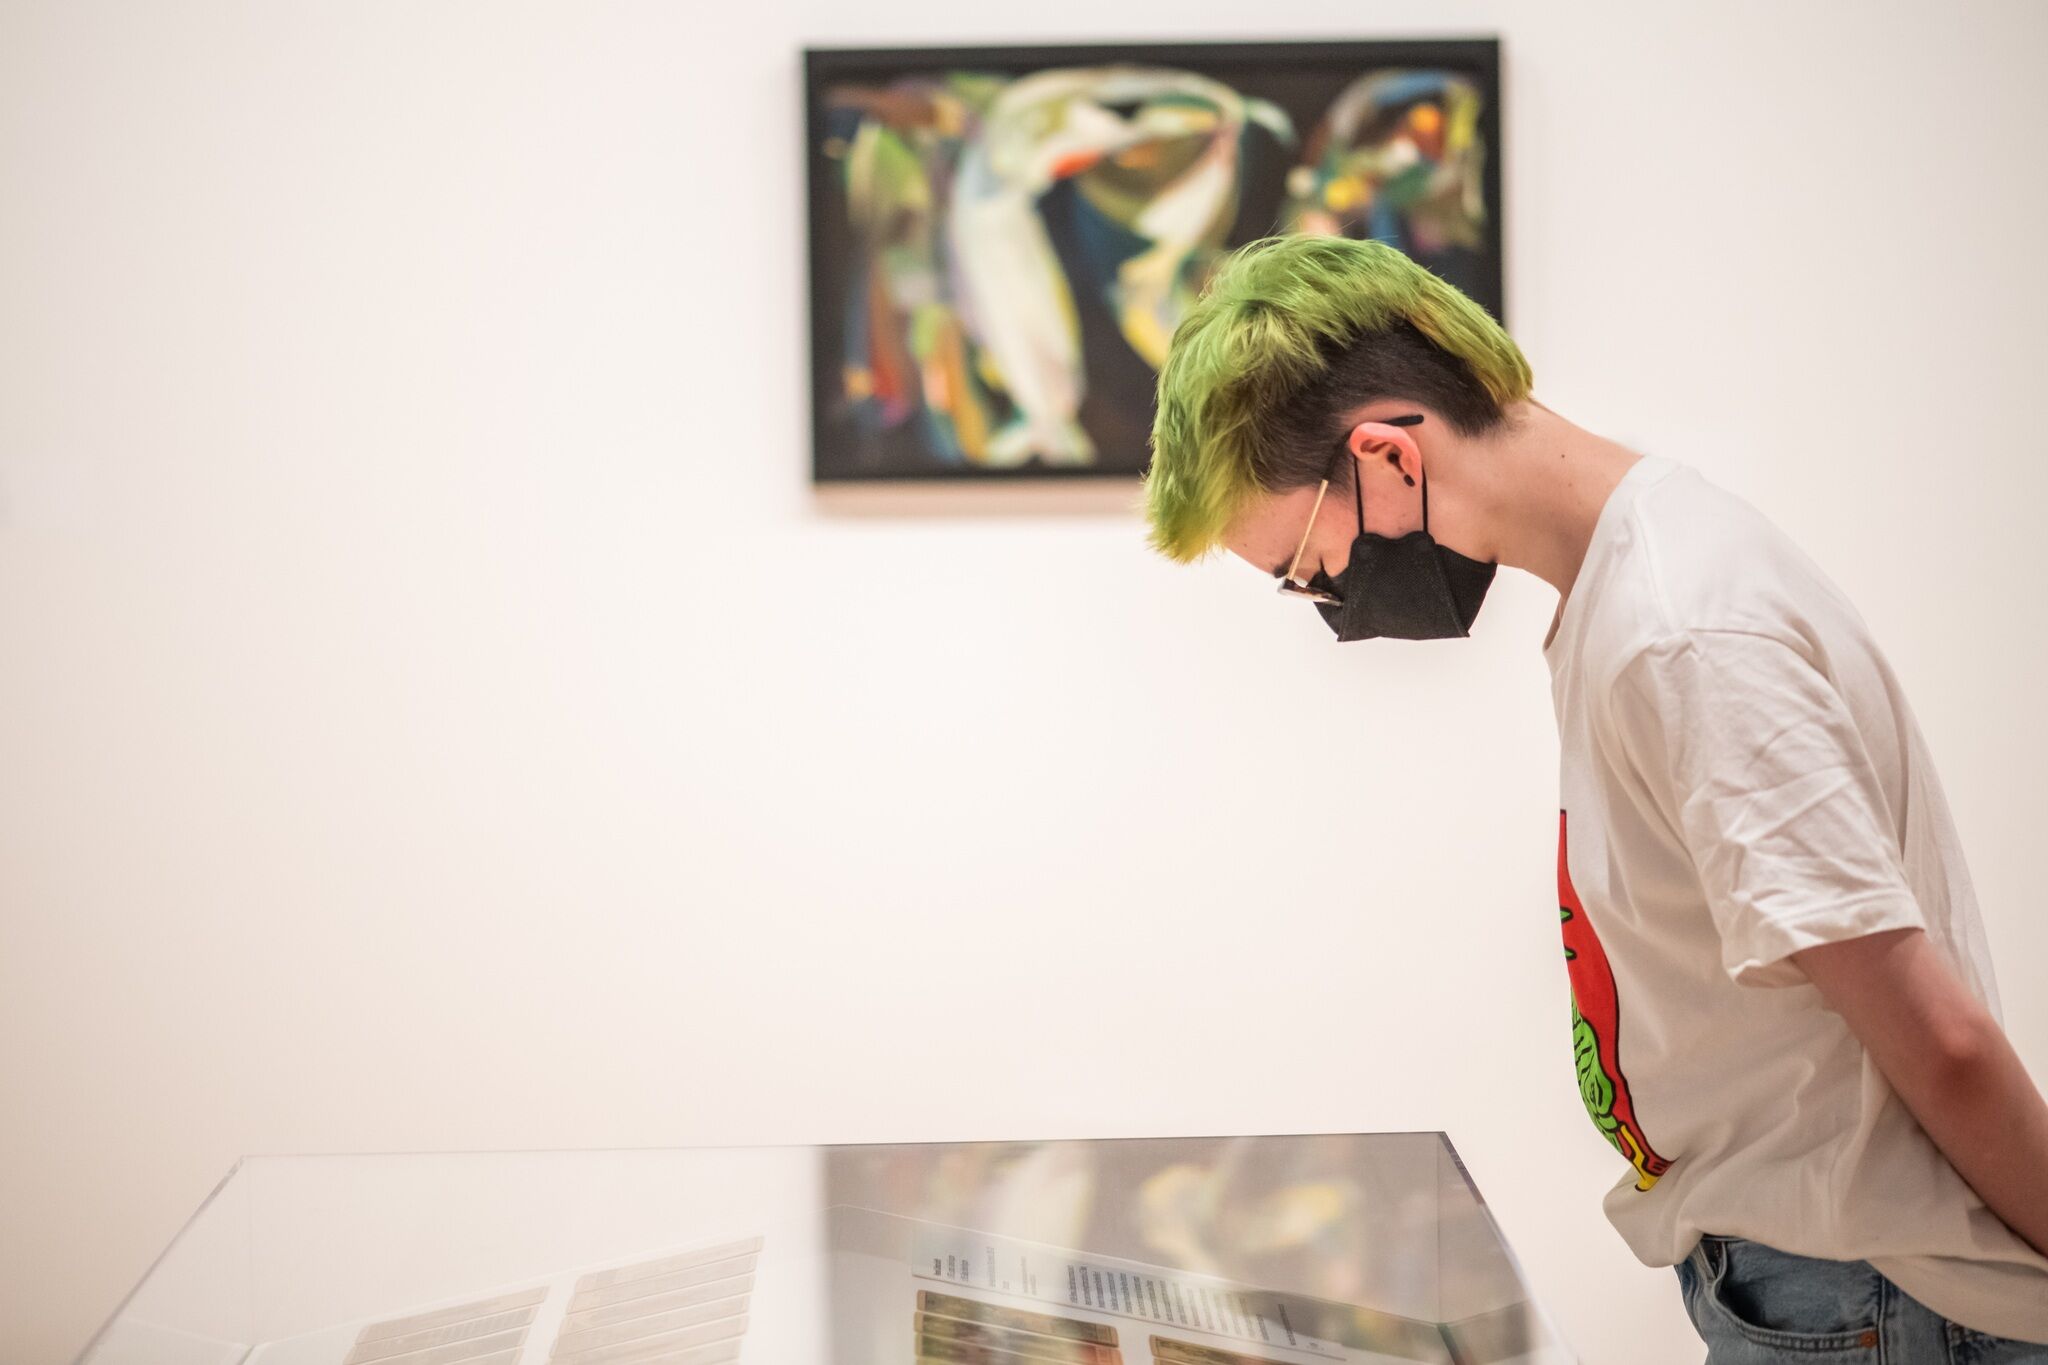 A person wearing a white shirt, black facemask, and glasses looks down at a glass case with small cards inside in a gallery with white walls. There is an out-of-focus abstract artwork hanging on the wall behind the person.